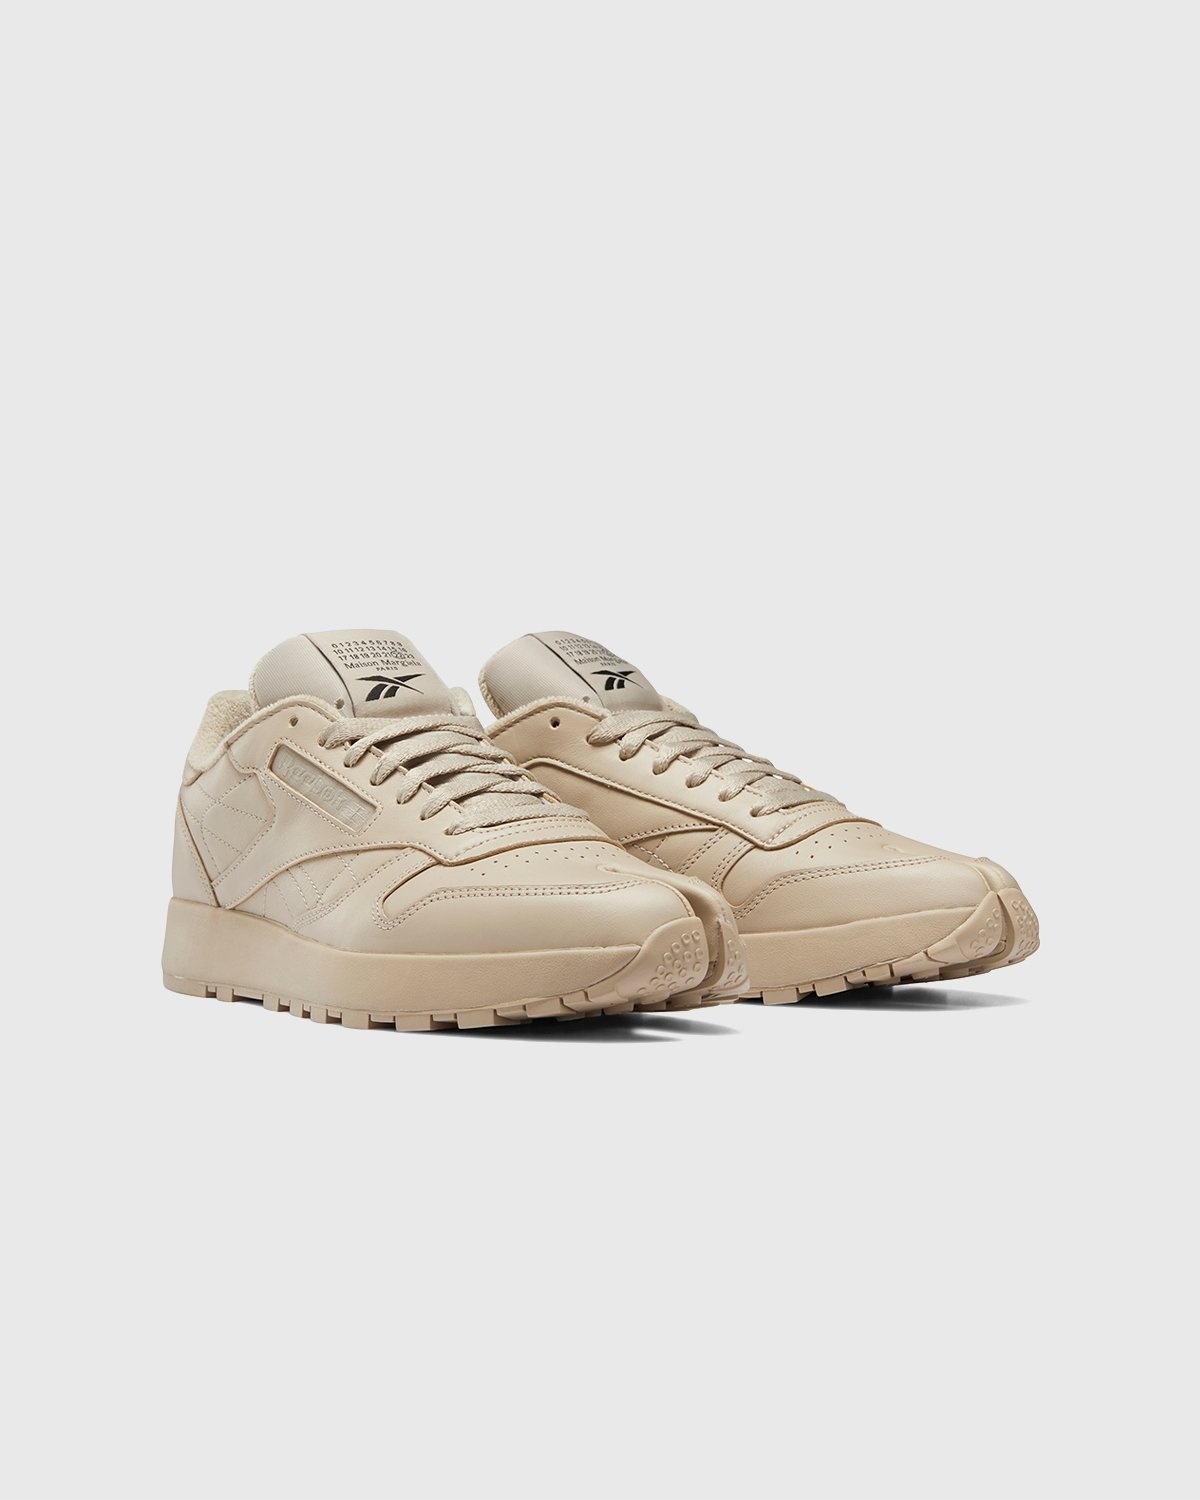 Maison Margiela x Reebok – Classic Leather Tabi Natural - Low Top Sneakers - Beige - Image 2